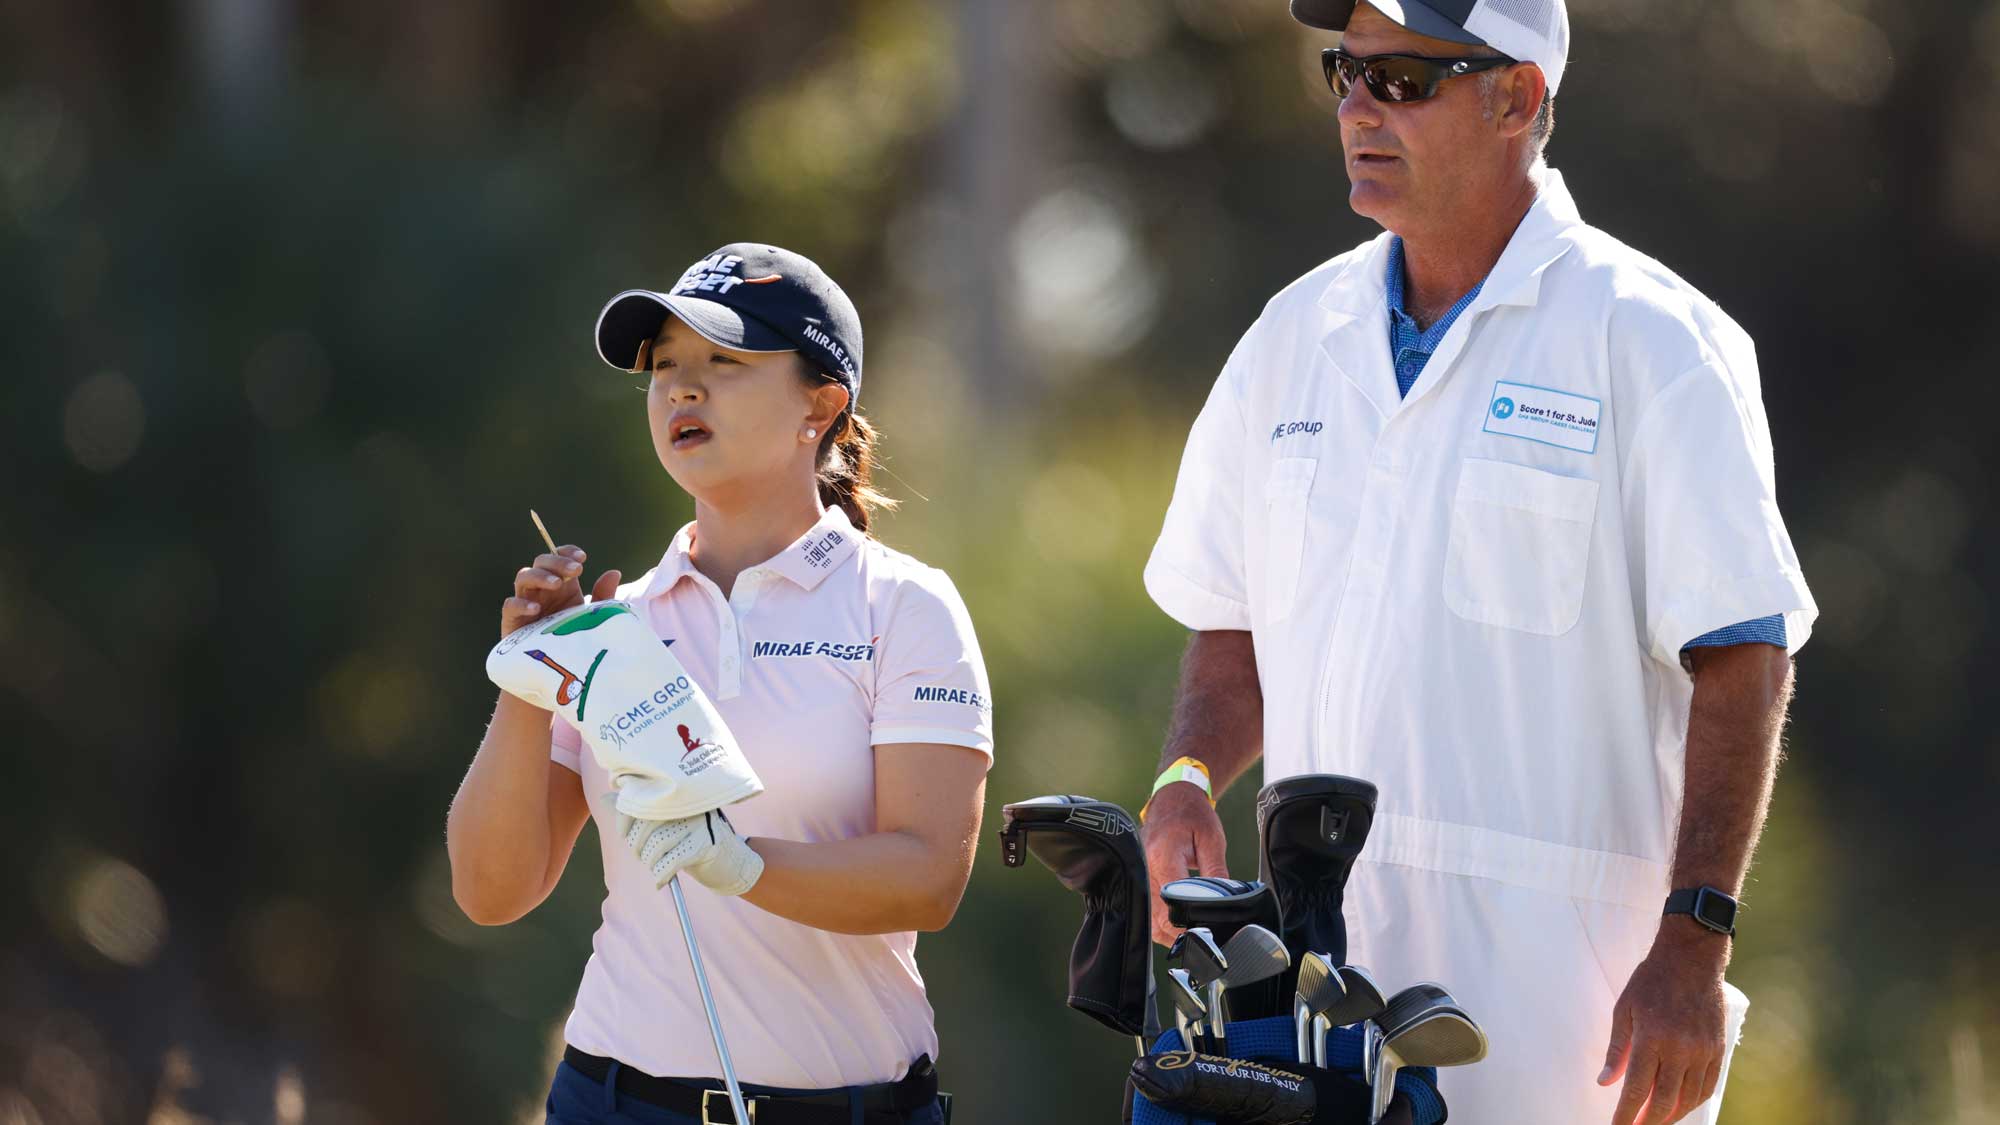 Sei-Young Kim of Korea talks with her caddie on the third hole during the third round of the CME Group Tour Championship